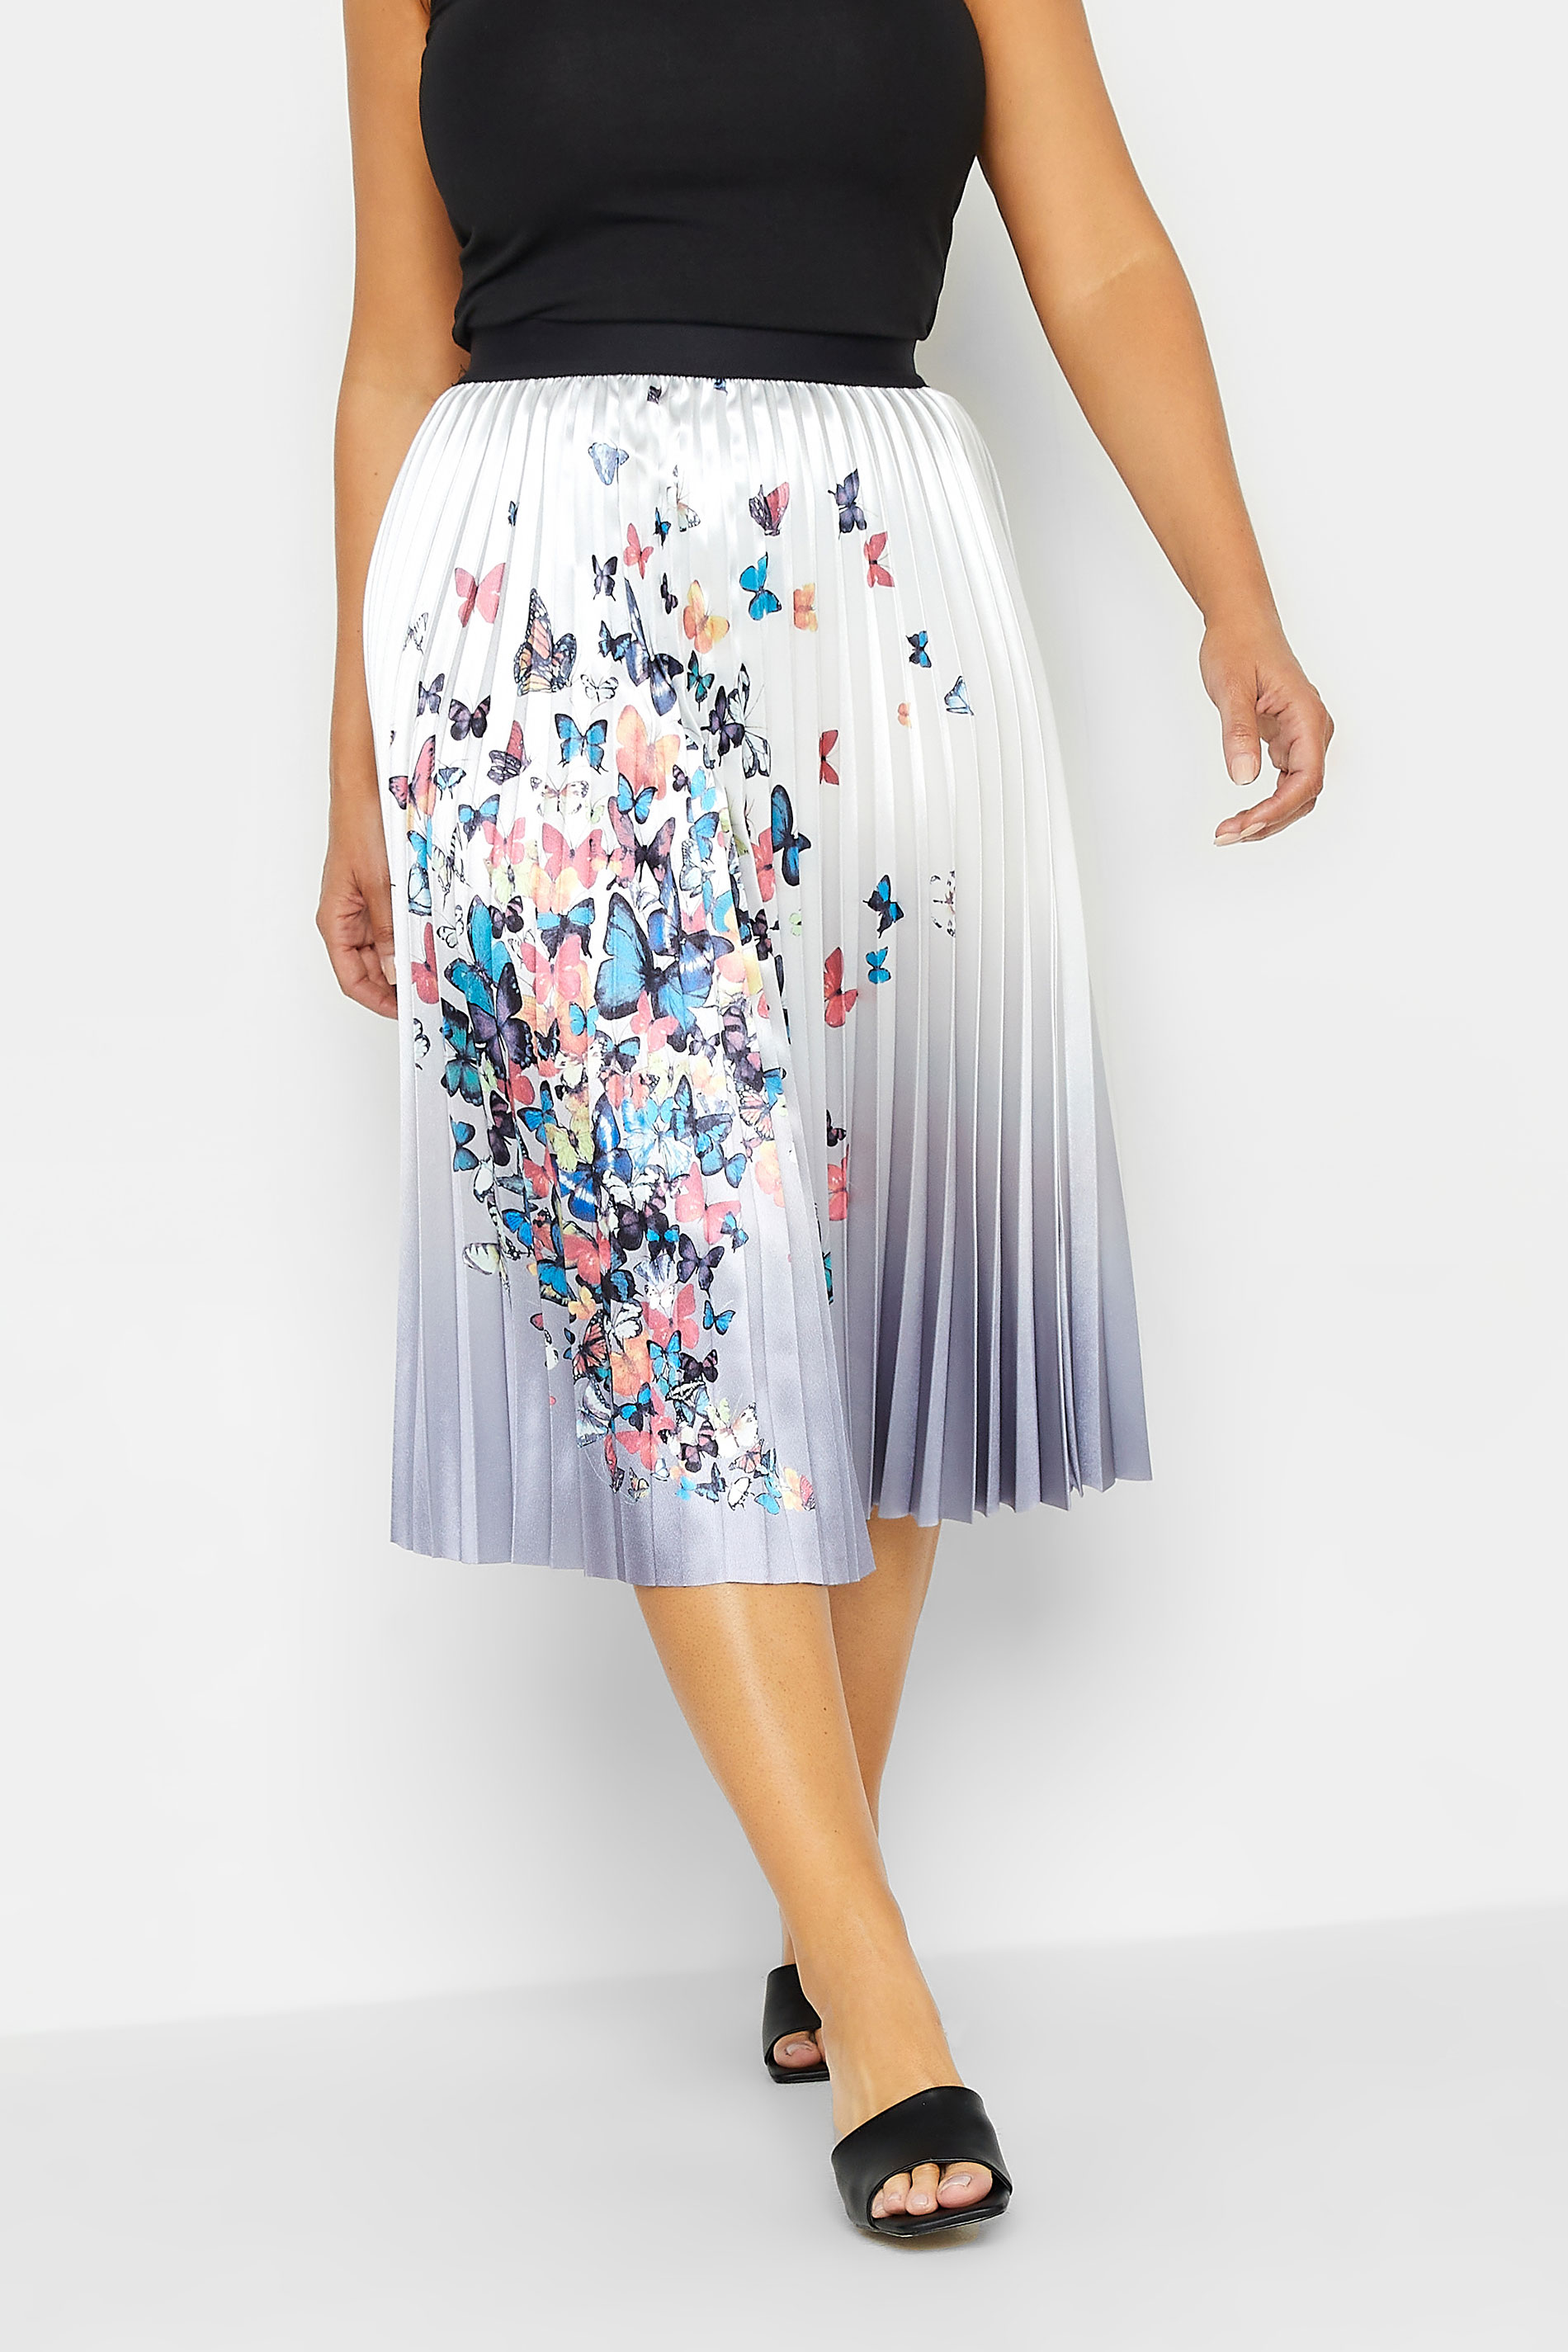 M&Co White Butterfly Print Pleated Midi Skirt | M&Co 1